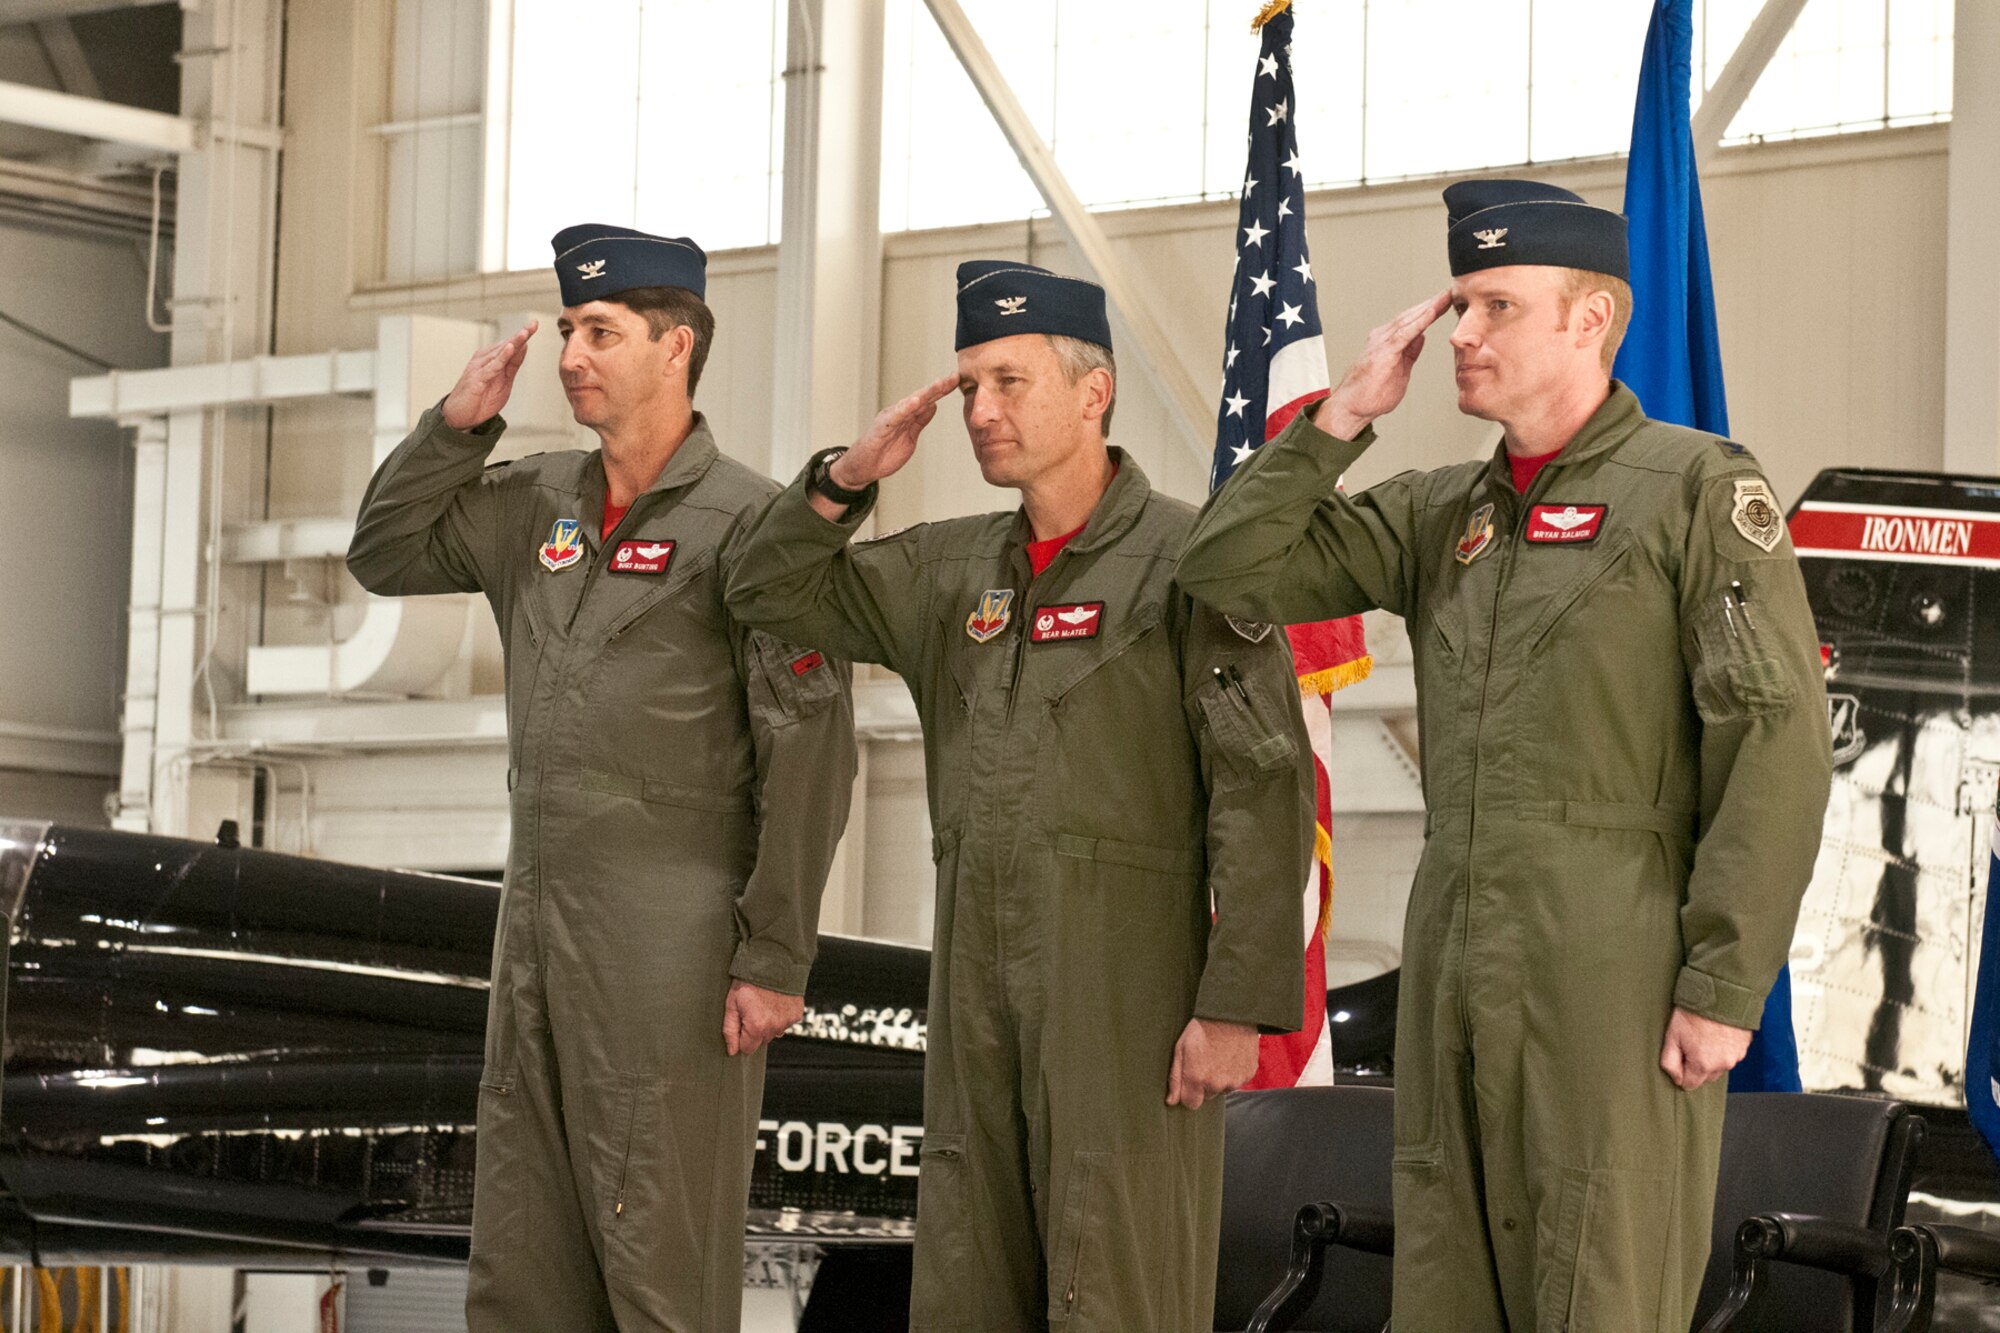 The Virginia Air National Guard 192nd Fighter Wing welcomed Col. Bryan “Coho” Salmon as the new 192nd Operations Group commander during a change of command ceremony at Joint Base Langley-Eustis, Virginia, Nov. 20, 2016. (U.S. Air National Guard photo by Senior Airman Johnisa B. Roberts)